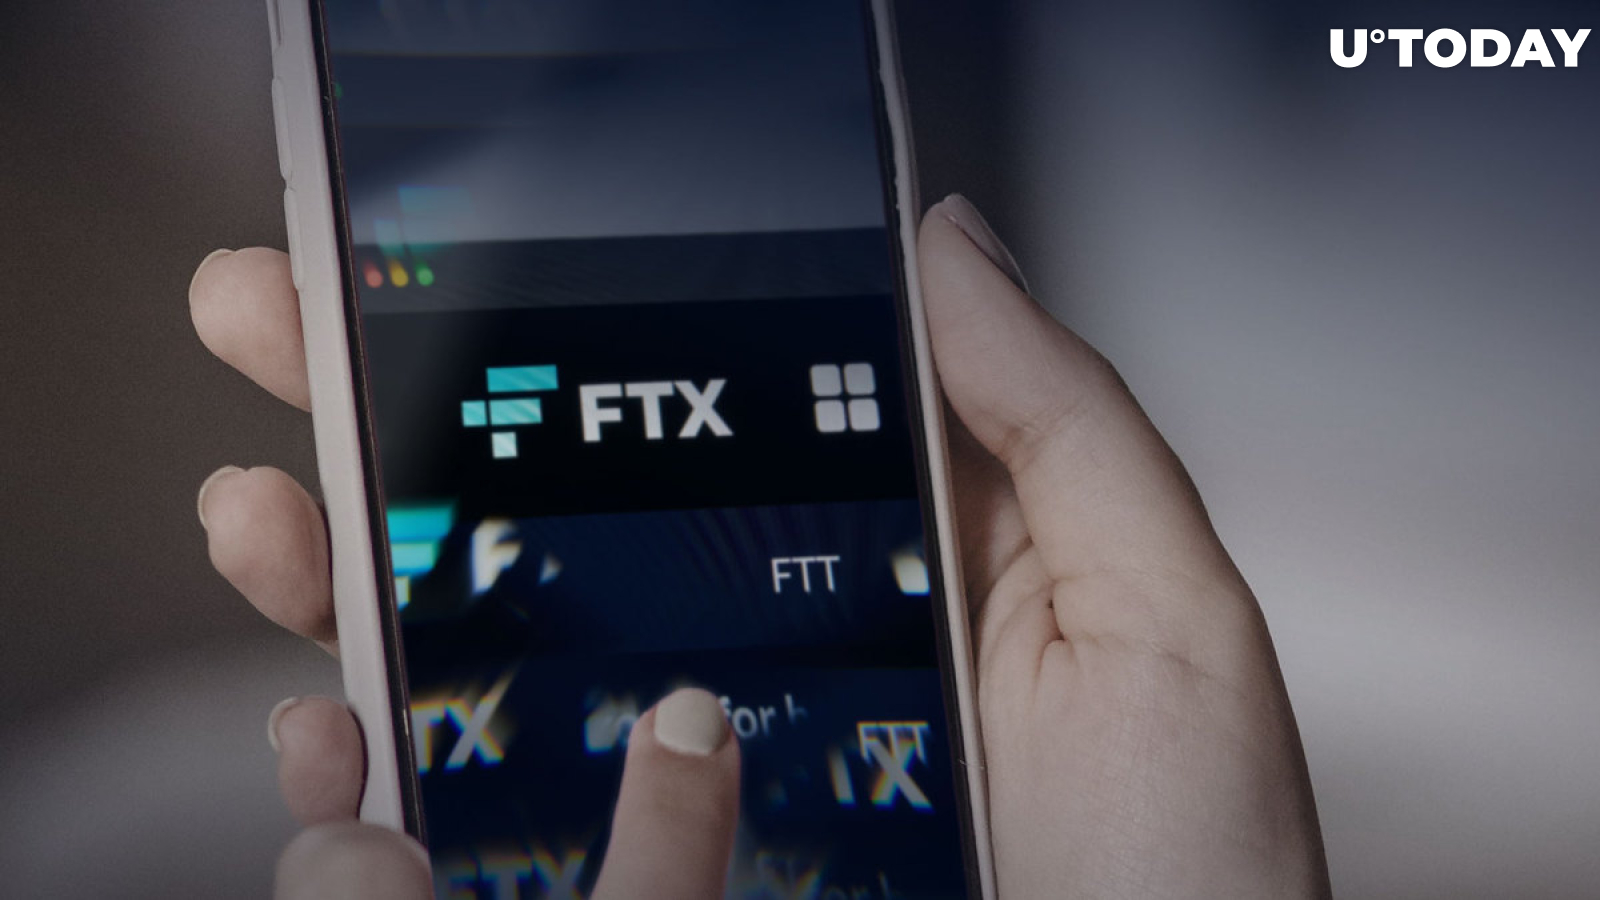 FTX Limiting Withdrawals to $1,000, Users Report Technical Issues